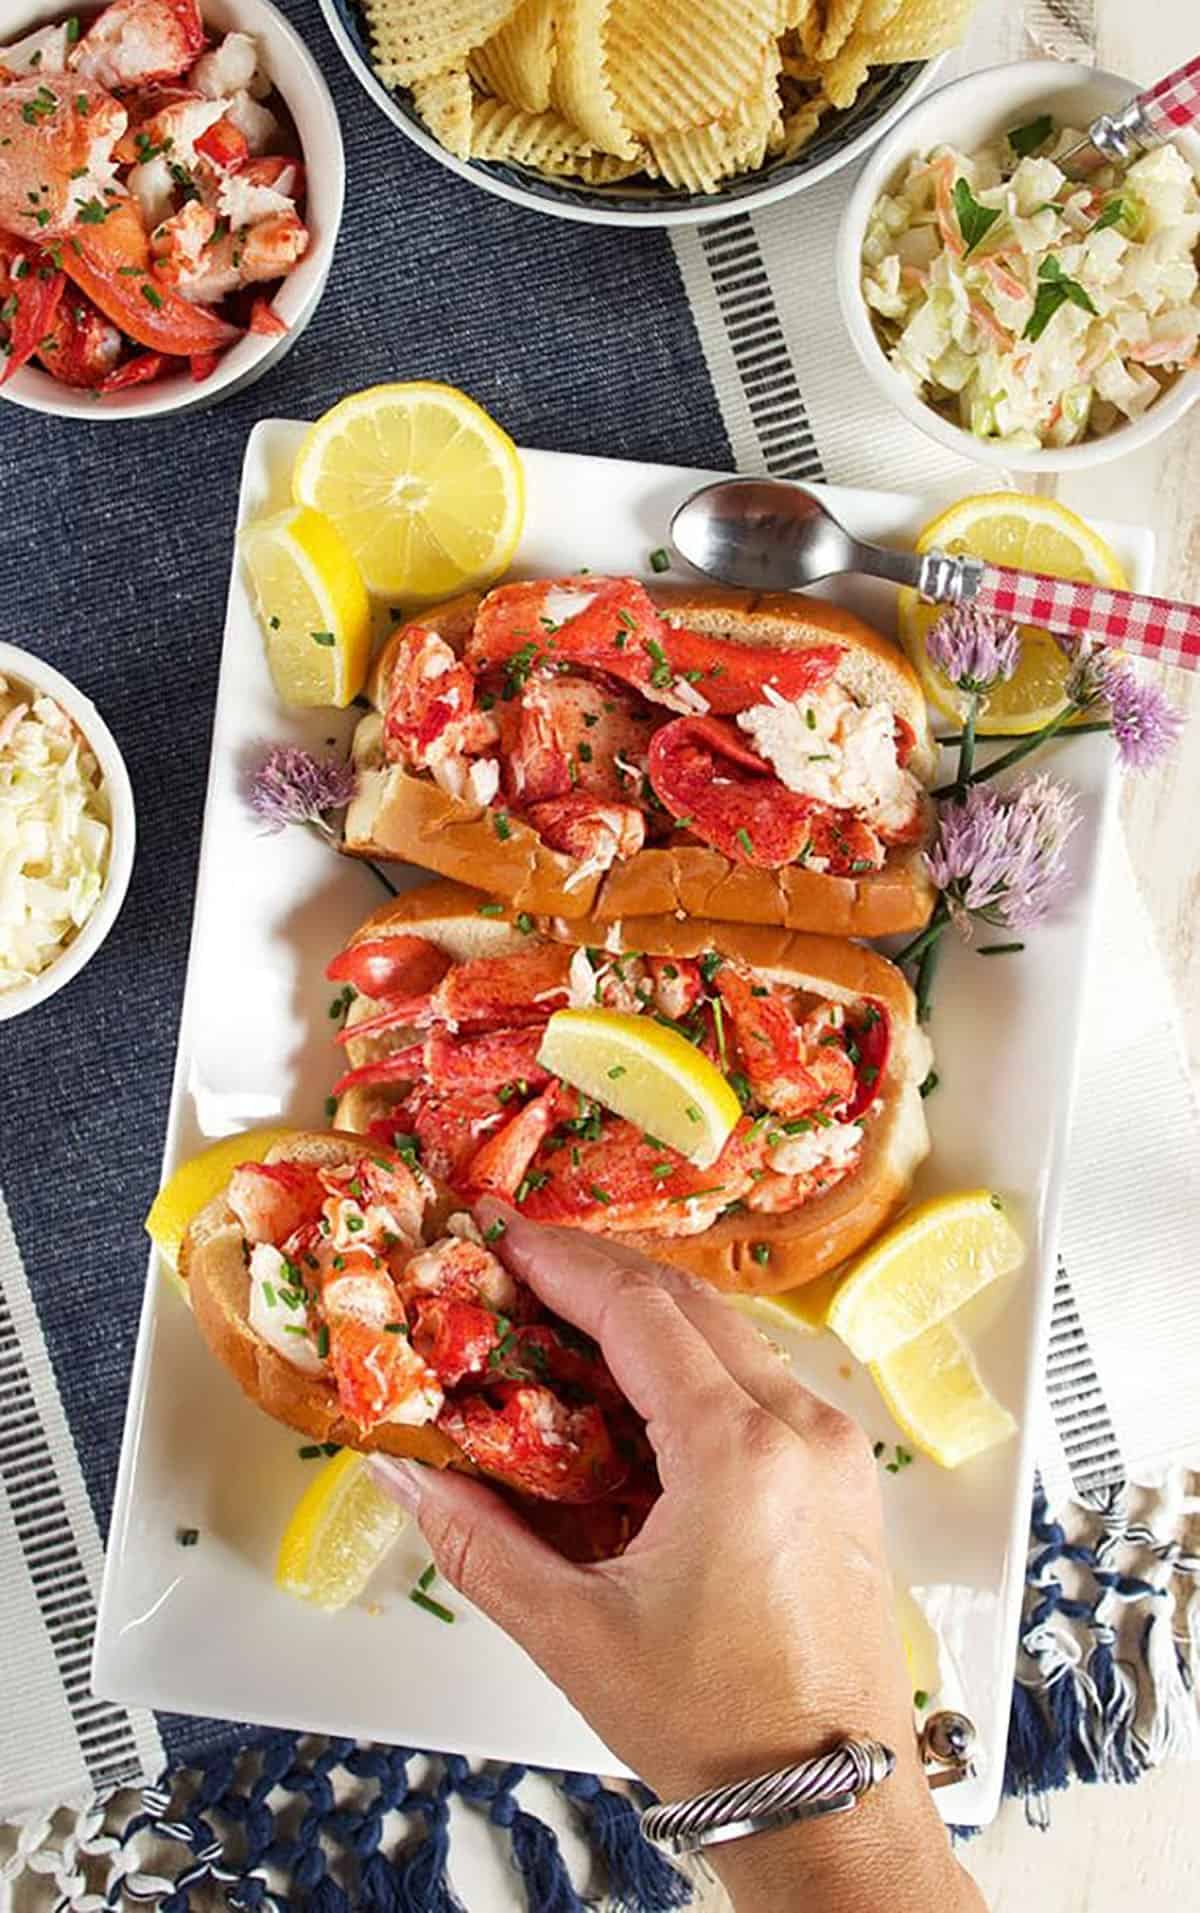 Lobster rolls on a platter with a hand taking one off the plate.